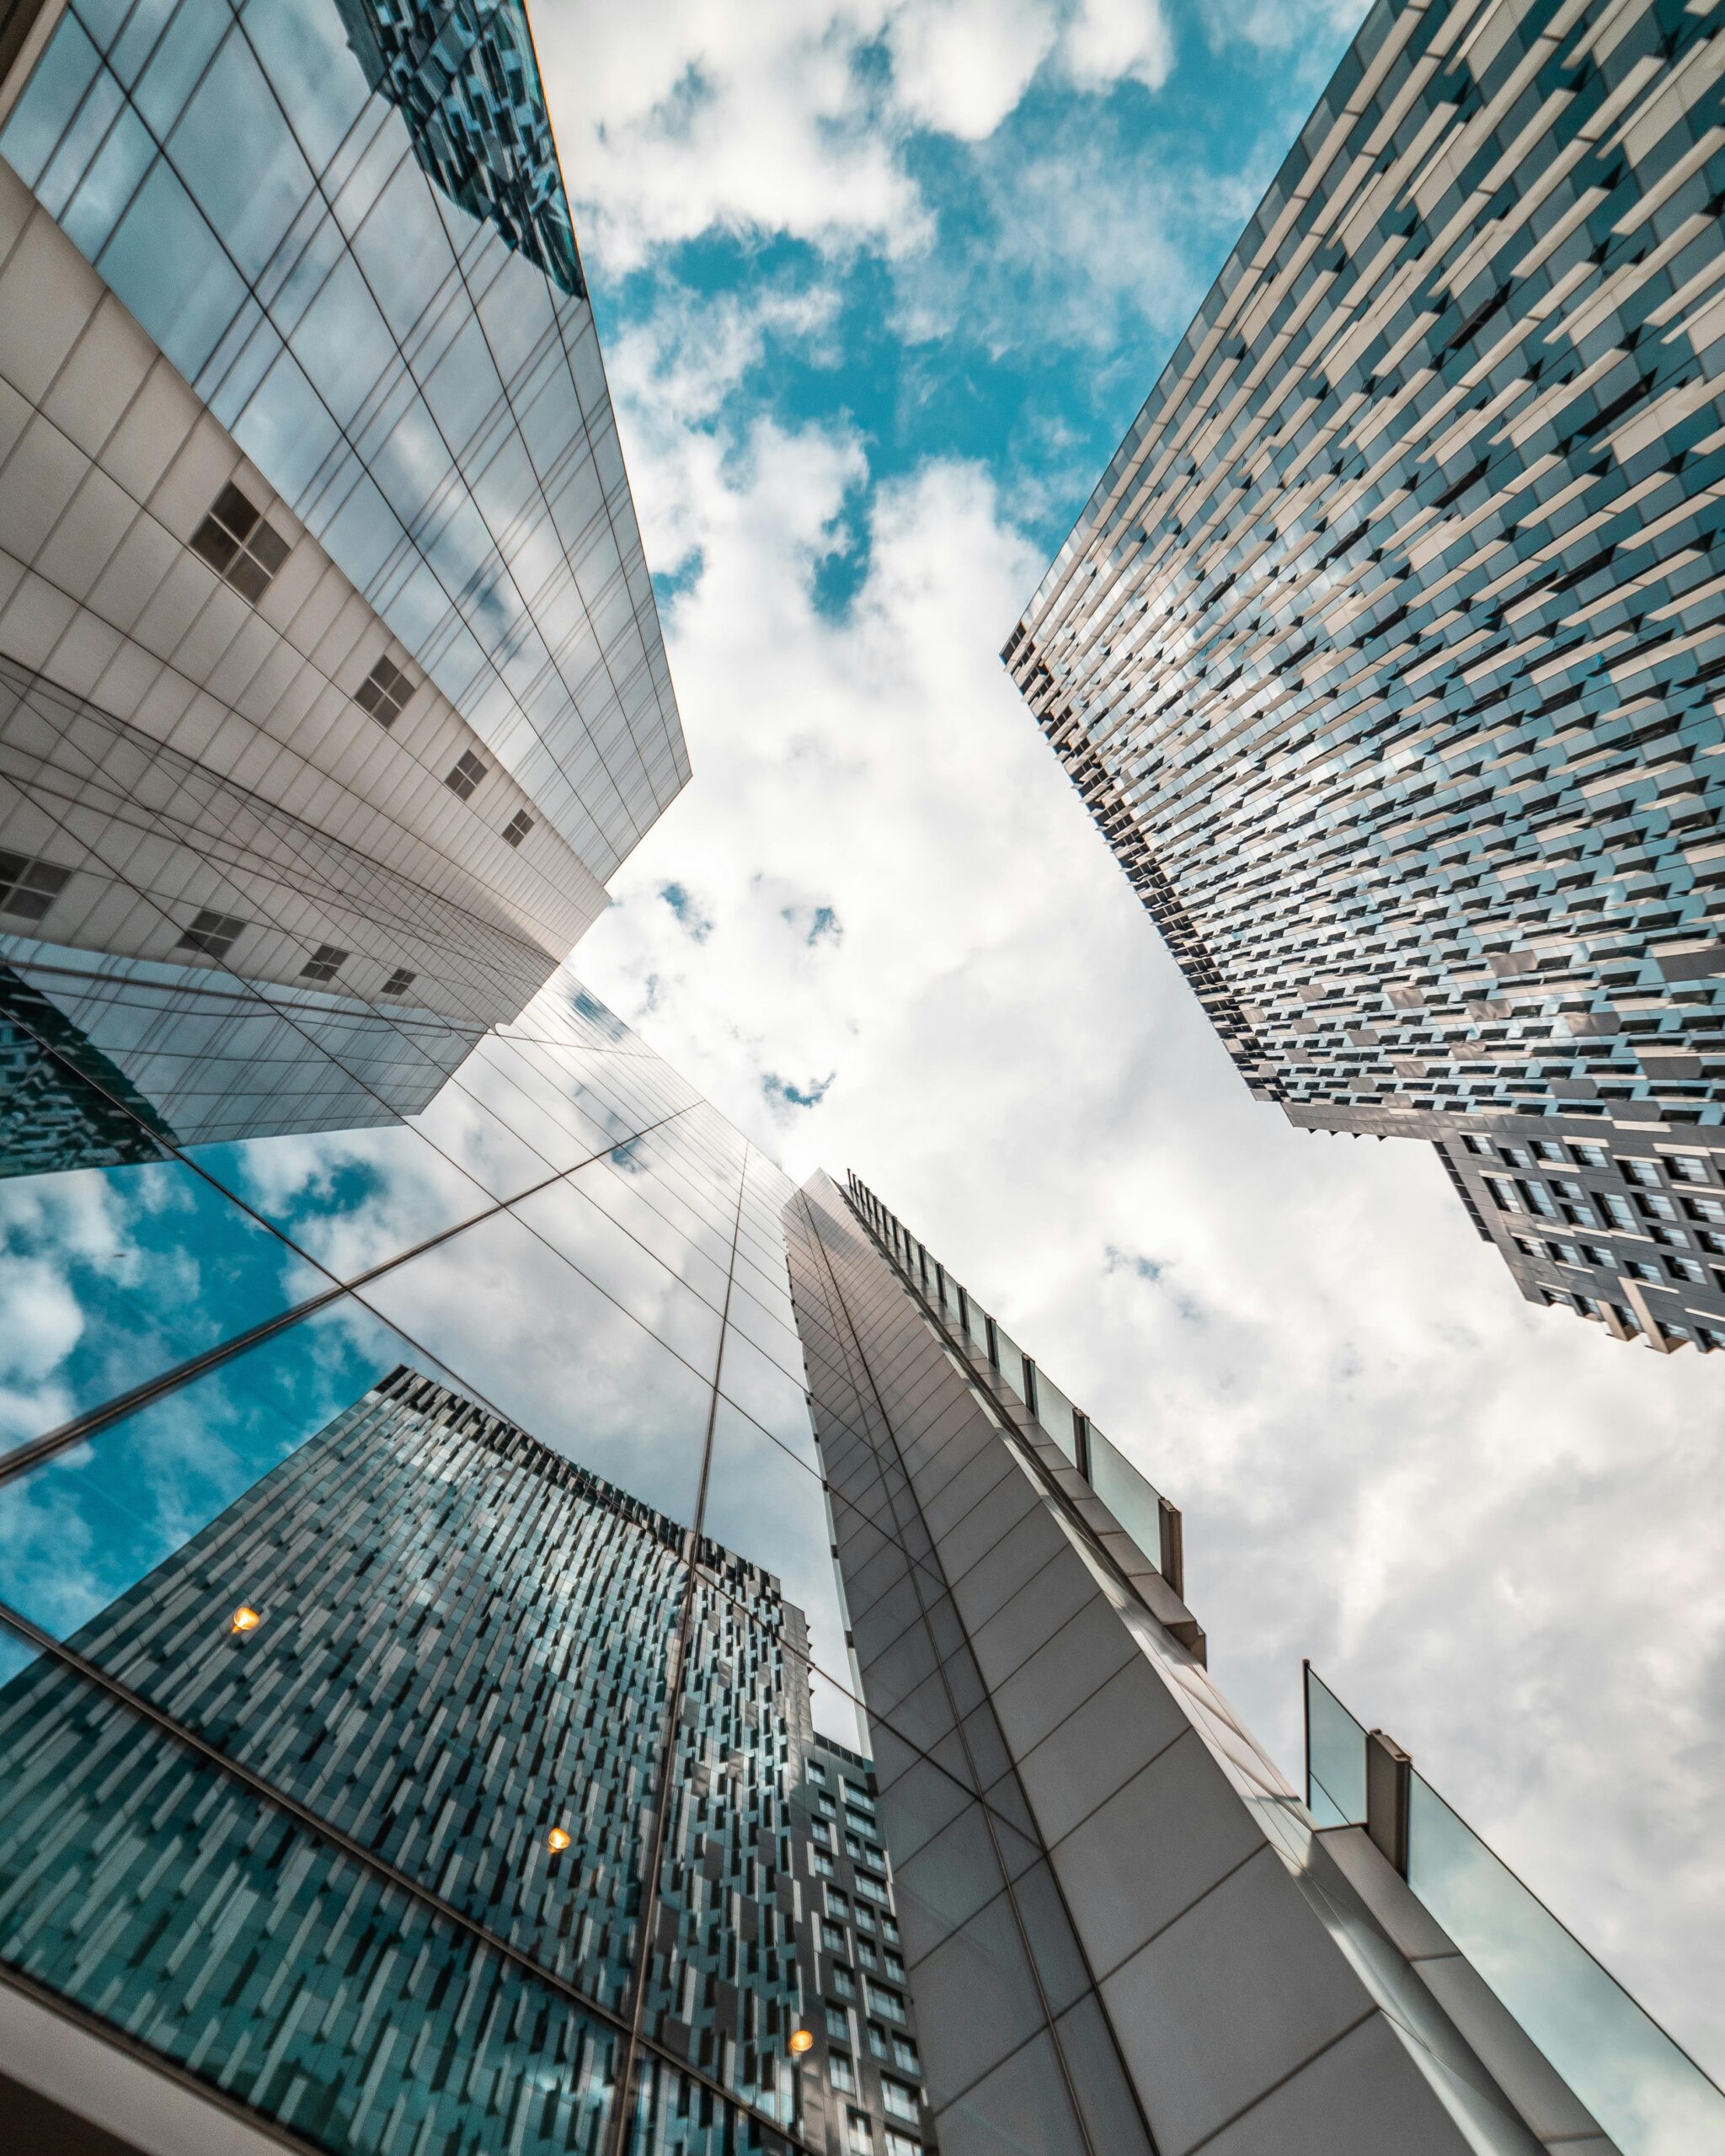 Low-Angle Photography of Glass Buildings